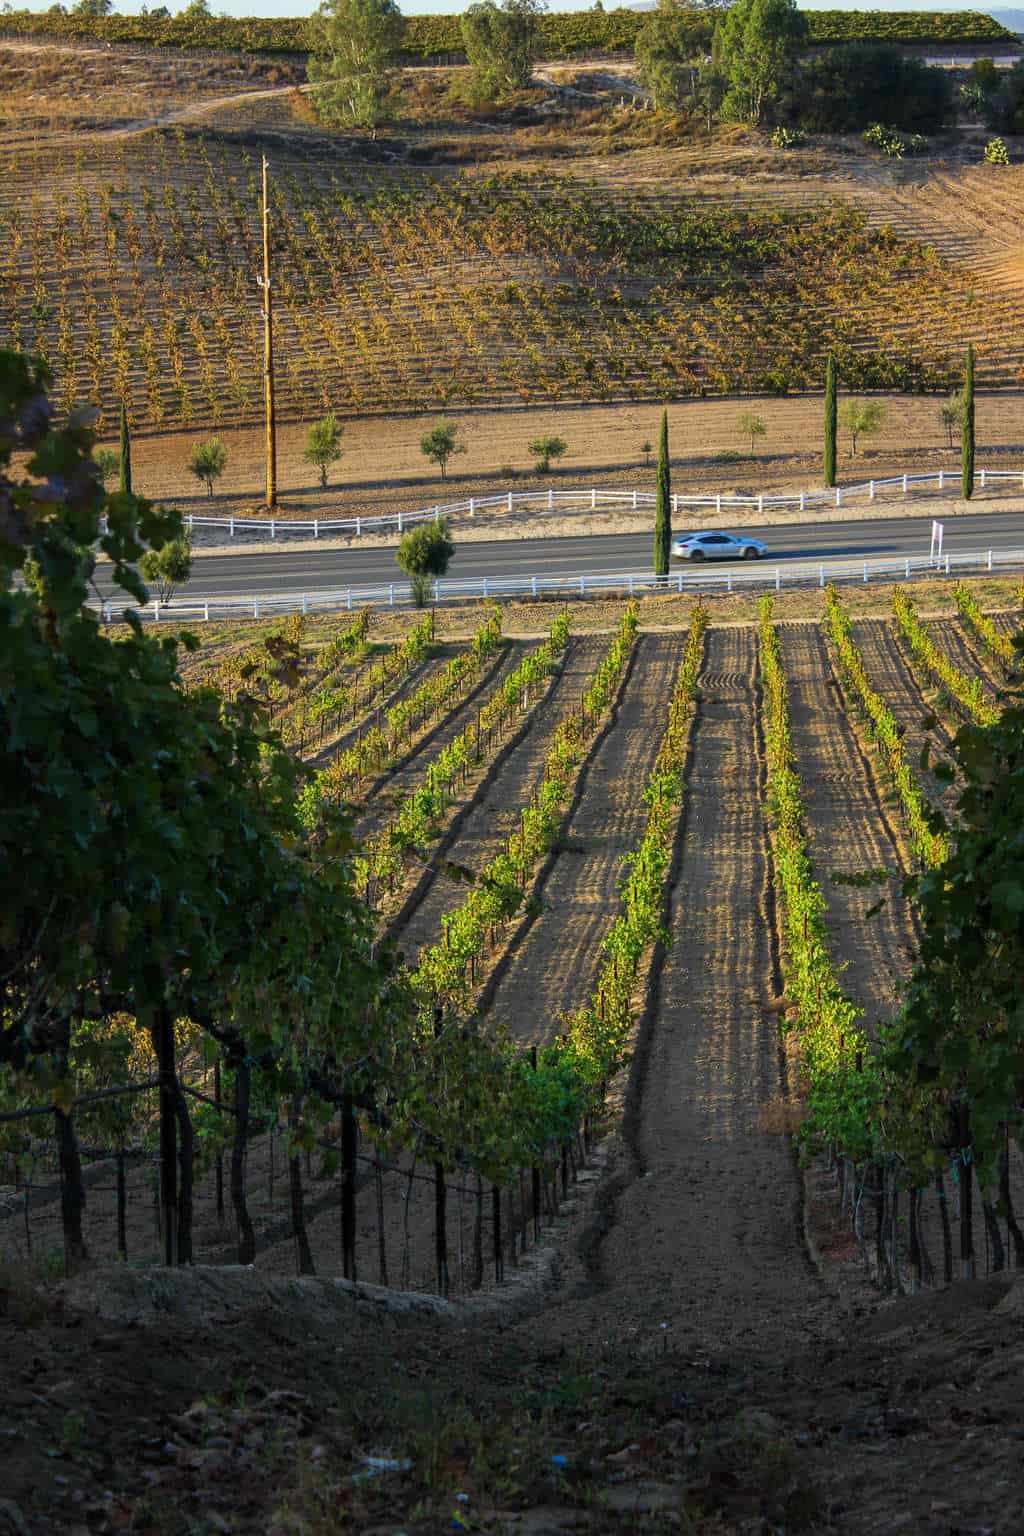 Rows of grapevines at Bel Vino Winery in Temecula